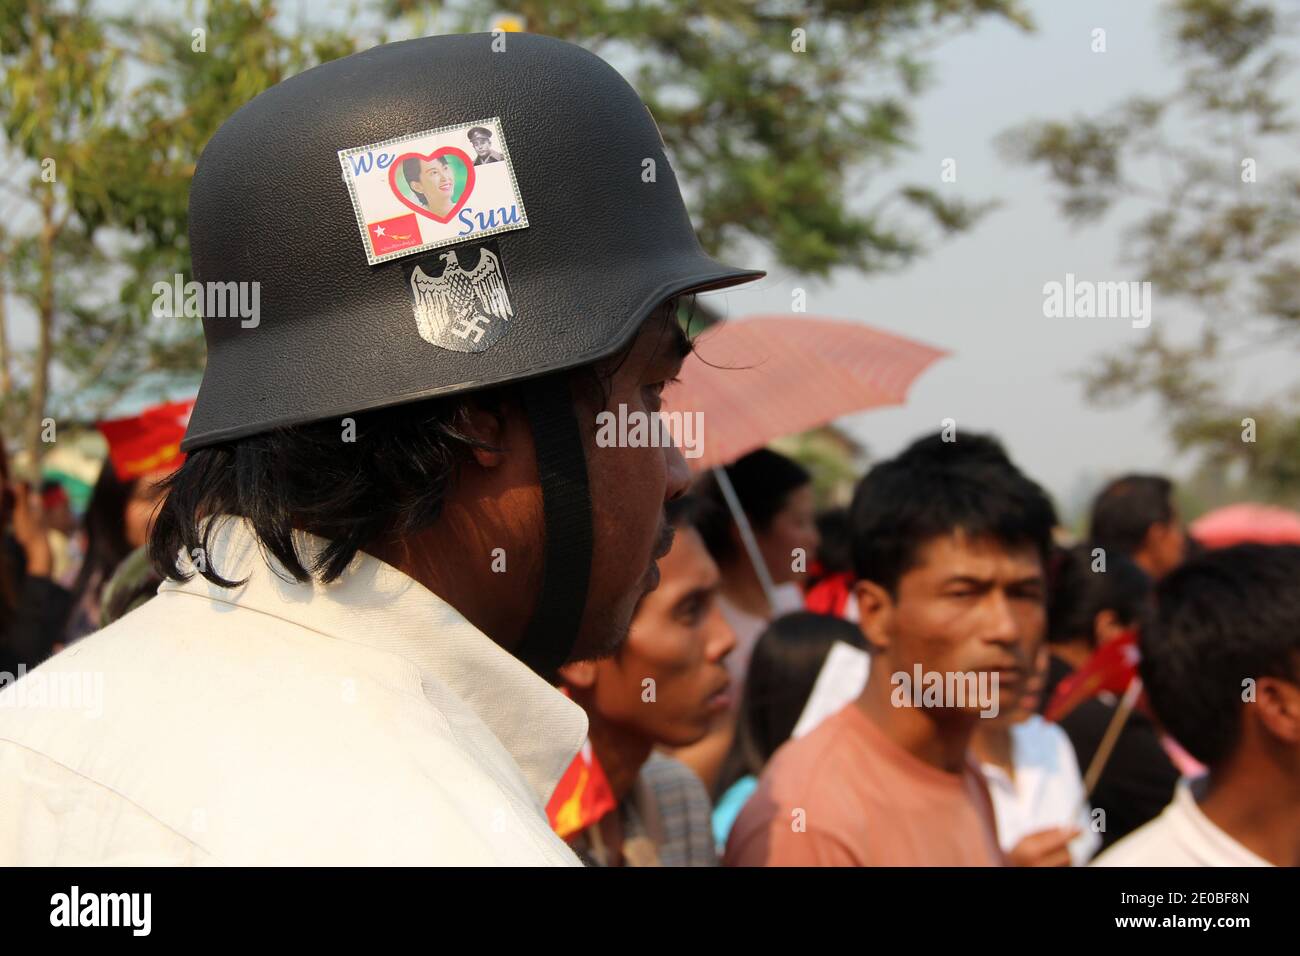 A man with a german army helmet and swastika nazi sign has also a sticker 'We love Suu' . He has no idea who the Nazi were. He is waiting for Daw Aung San Suu Kyi a to give delirious welcome in Lashio, Shan State.. Lashio, Myanmar, on March 17, 2012. Photo by Christophe Loviny/ABACAPRESS.COM Stock Photo